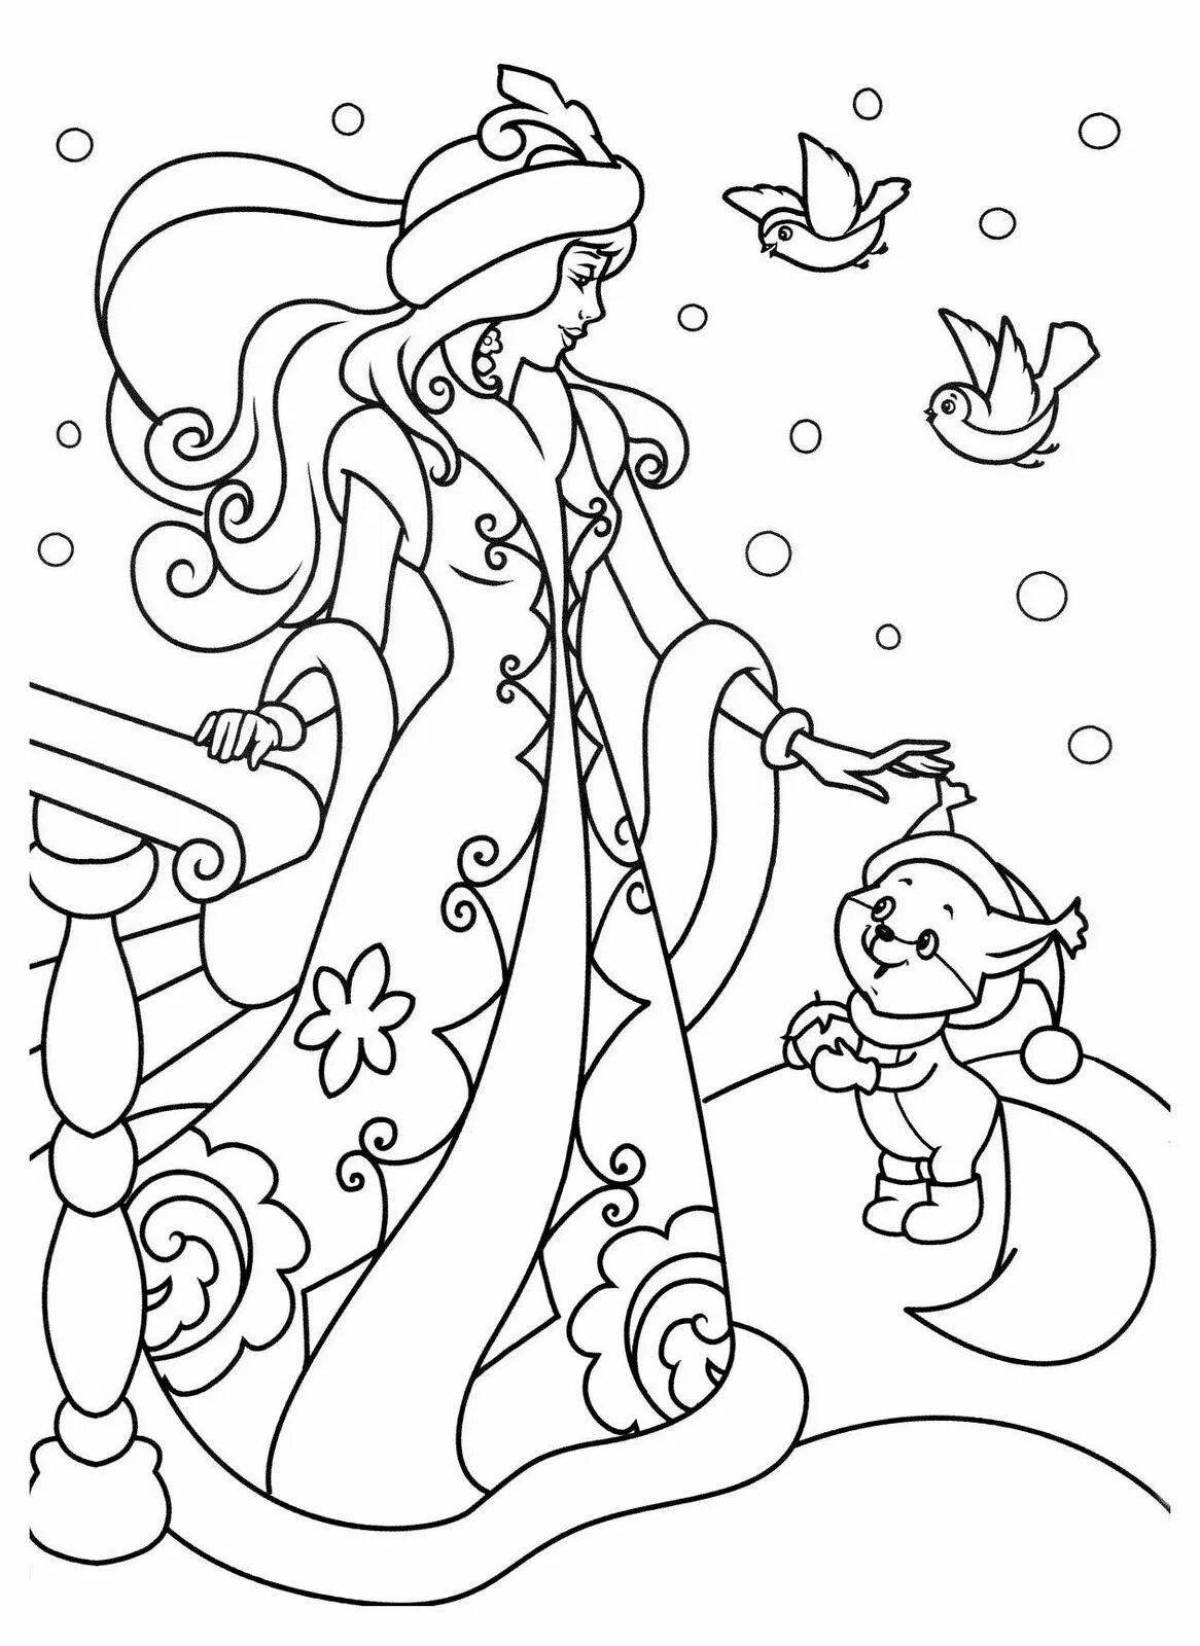 Exquisite snow maiden coloring by numbers